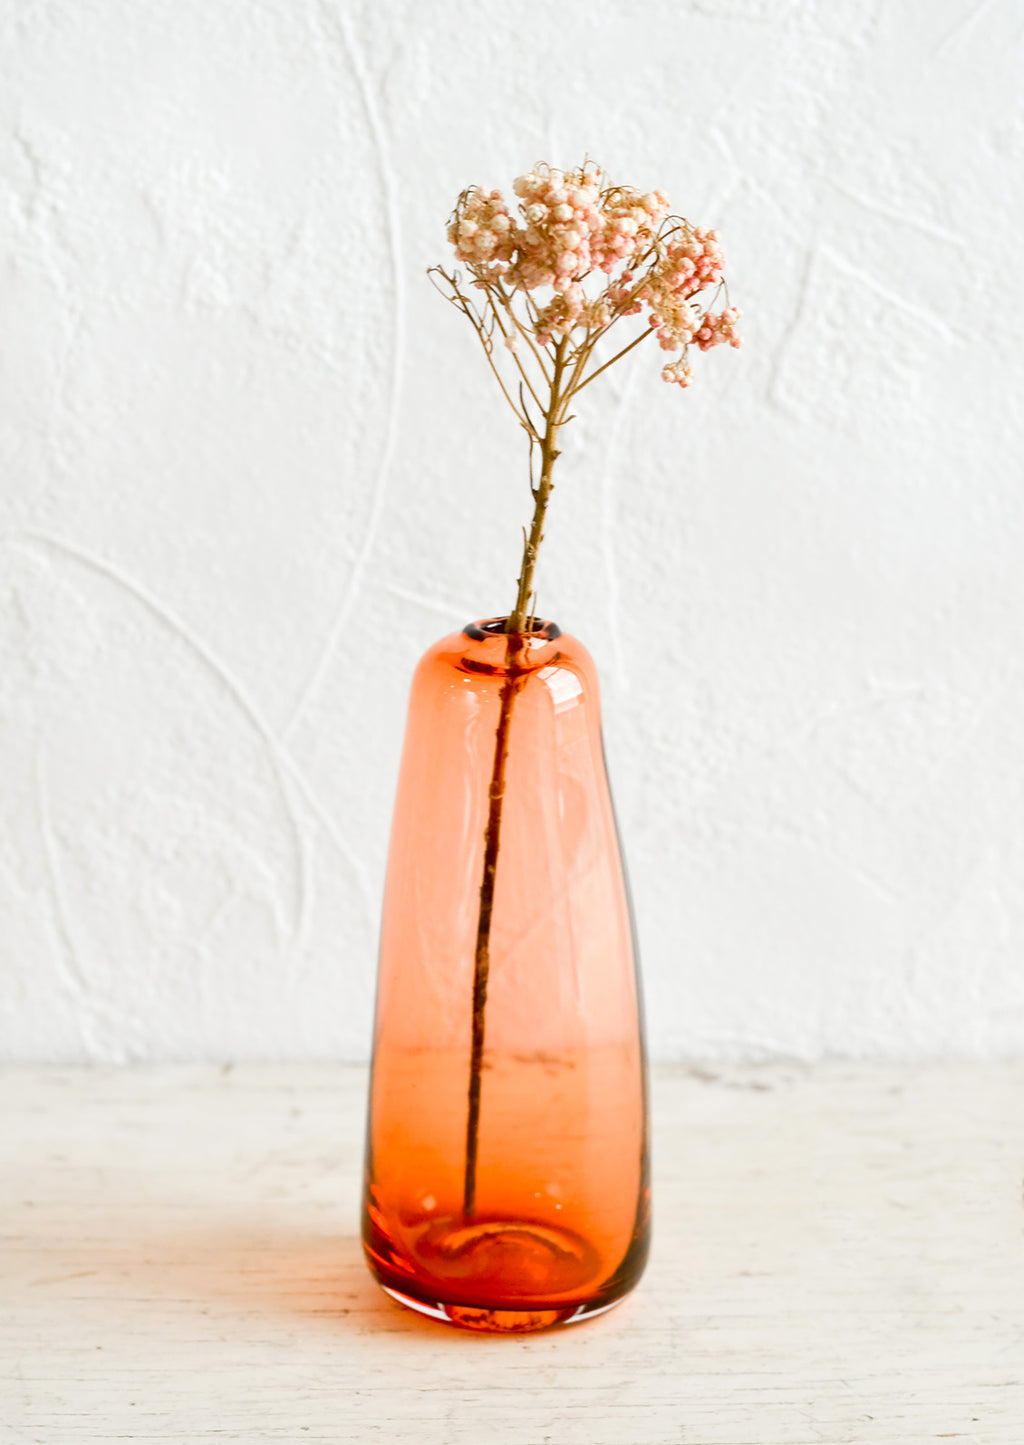 Cherry / Tall: A tall glass bud vase in translucent red-orange.